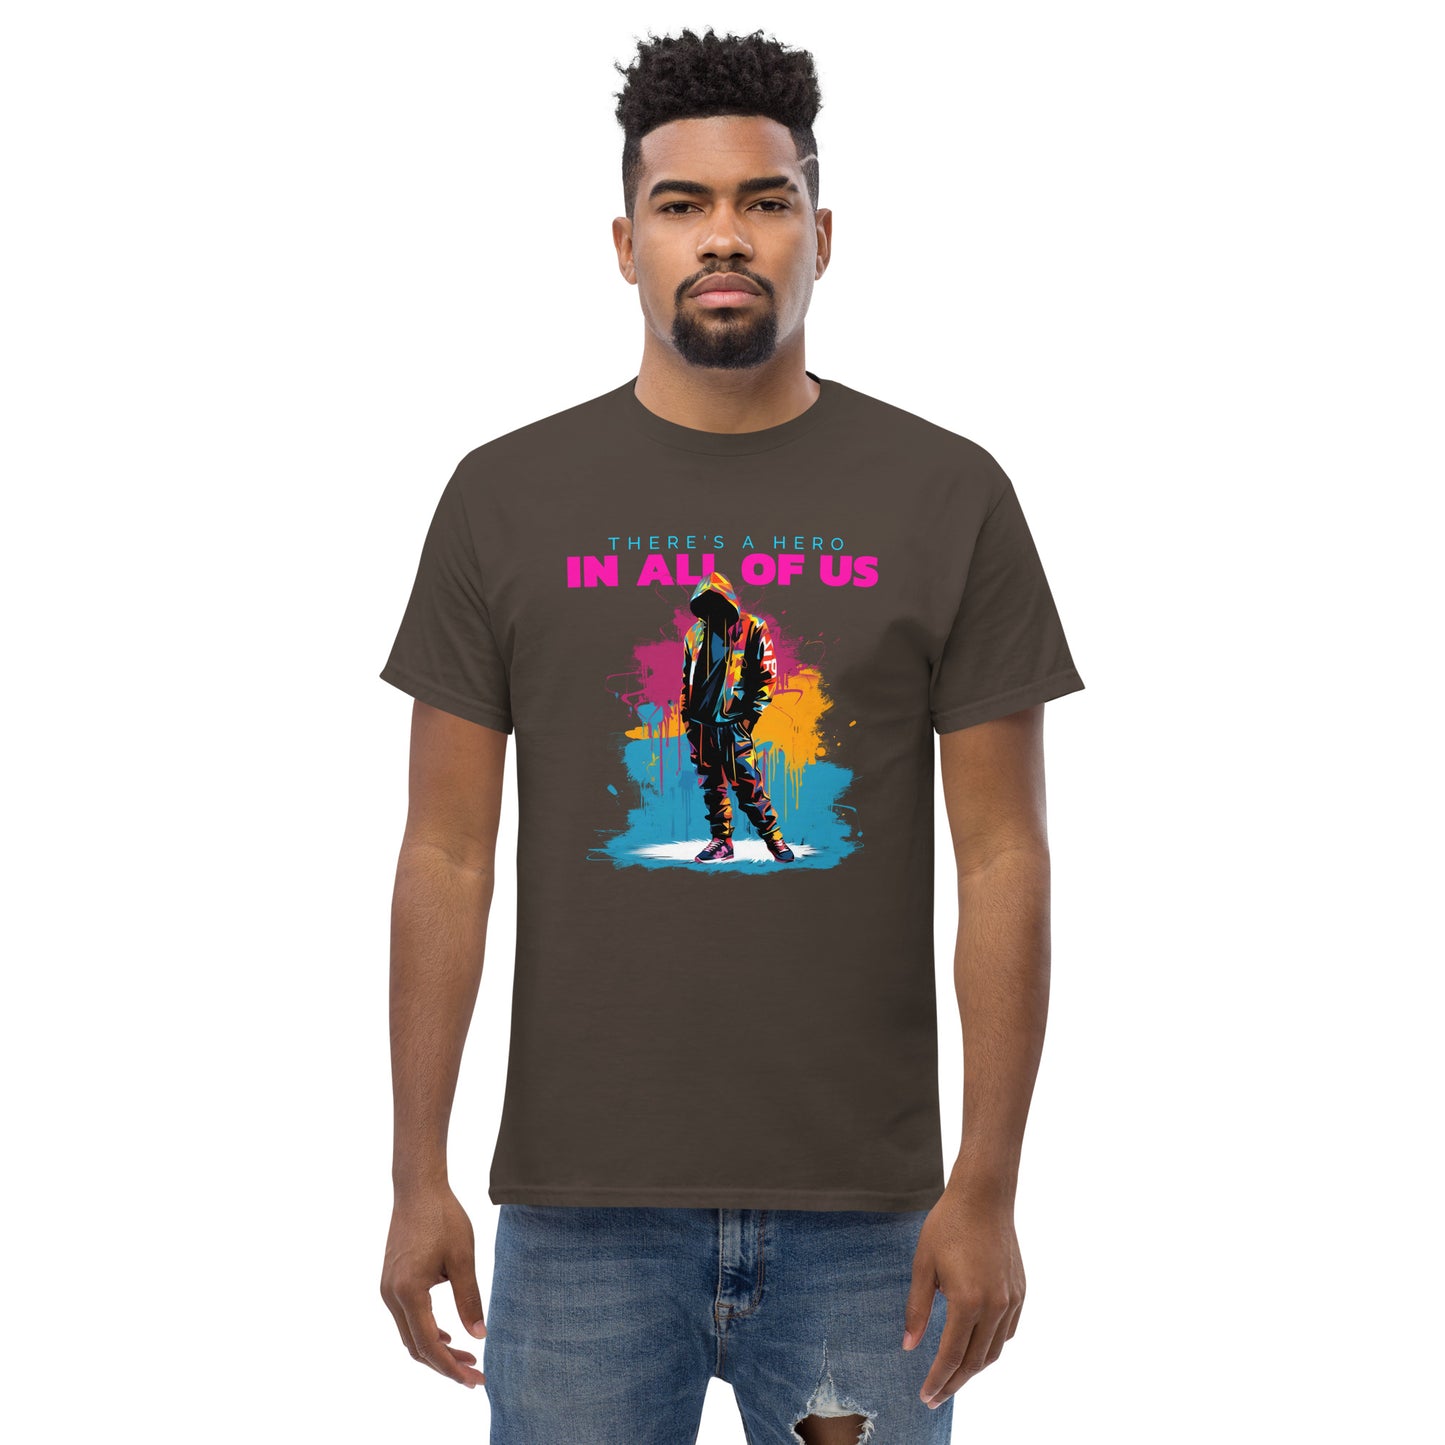 "There's a Hero in all of us"  Men's classic tee